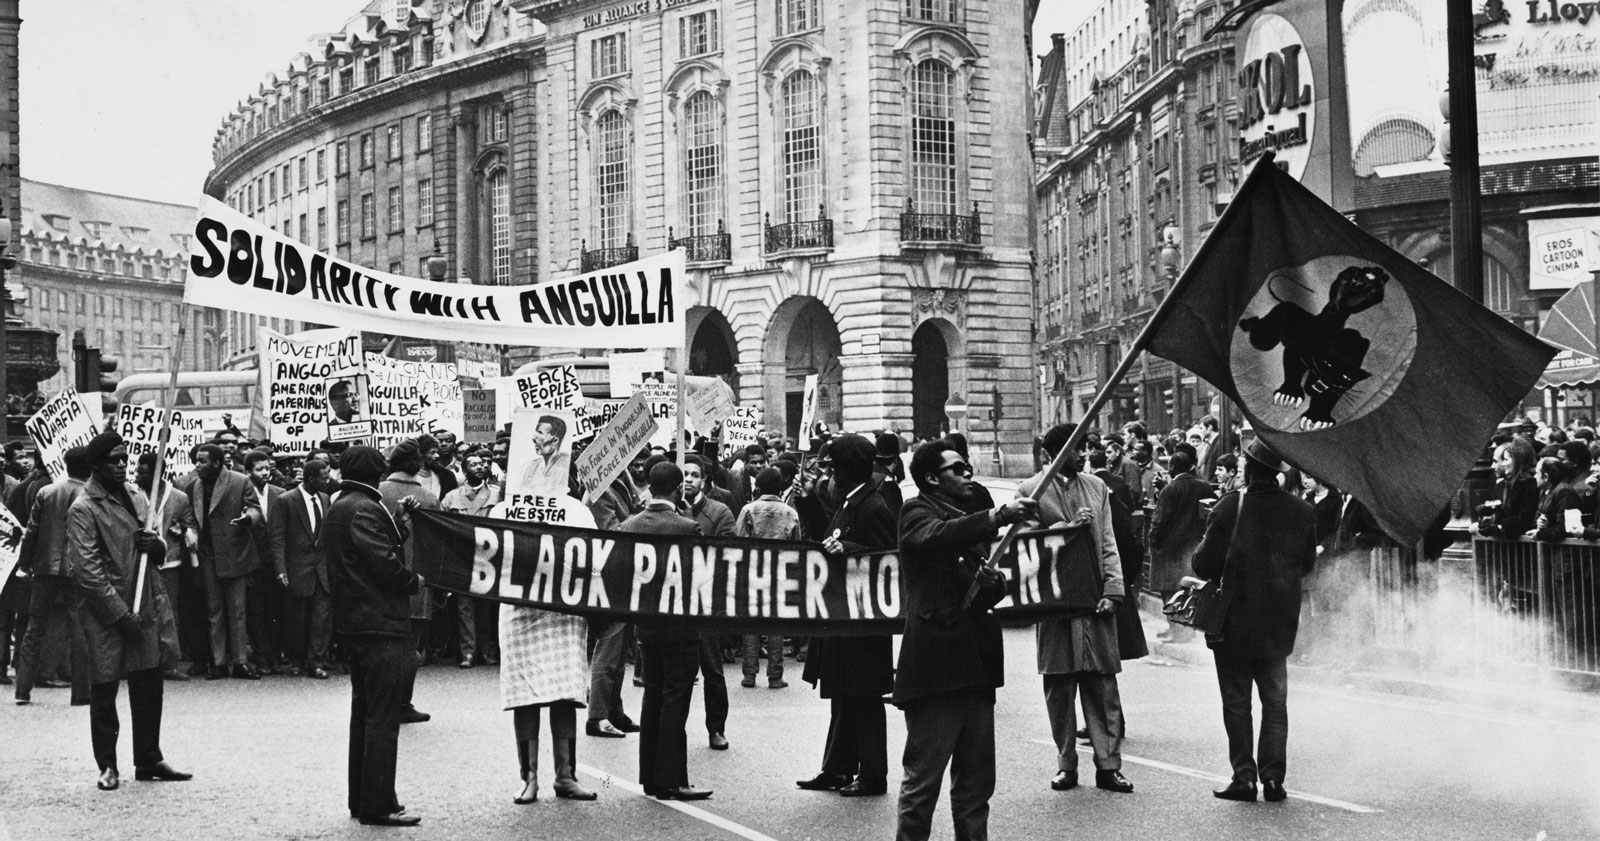 The British Black Panther movement participating in a protest in Piccadilly Circus, London, against the British invasion of Anguilla, 24 March 1969.